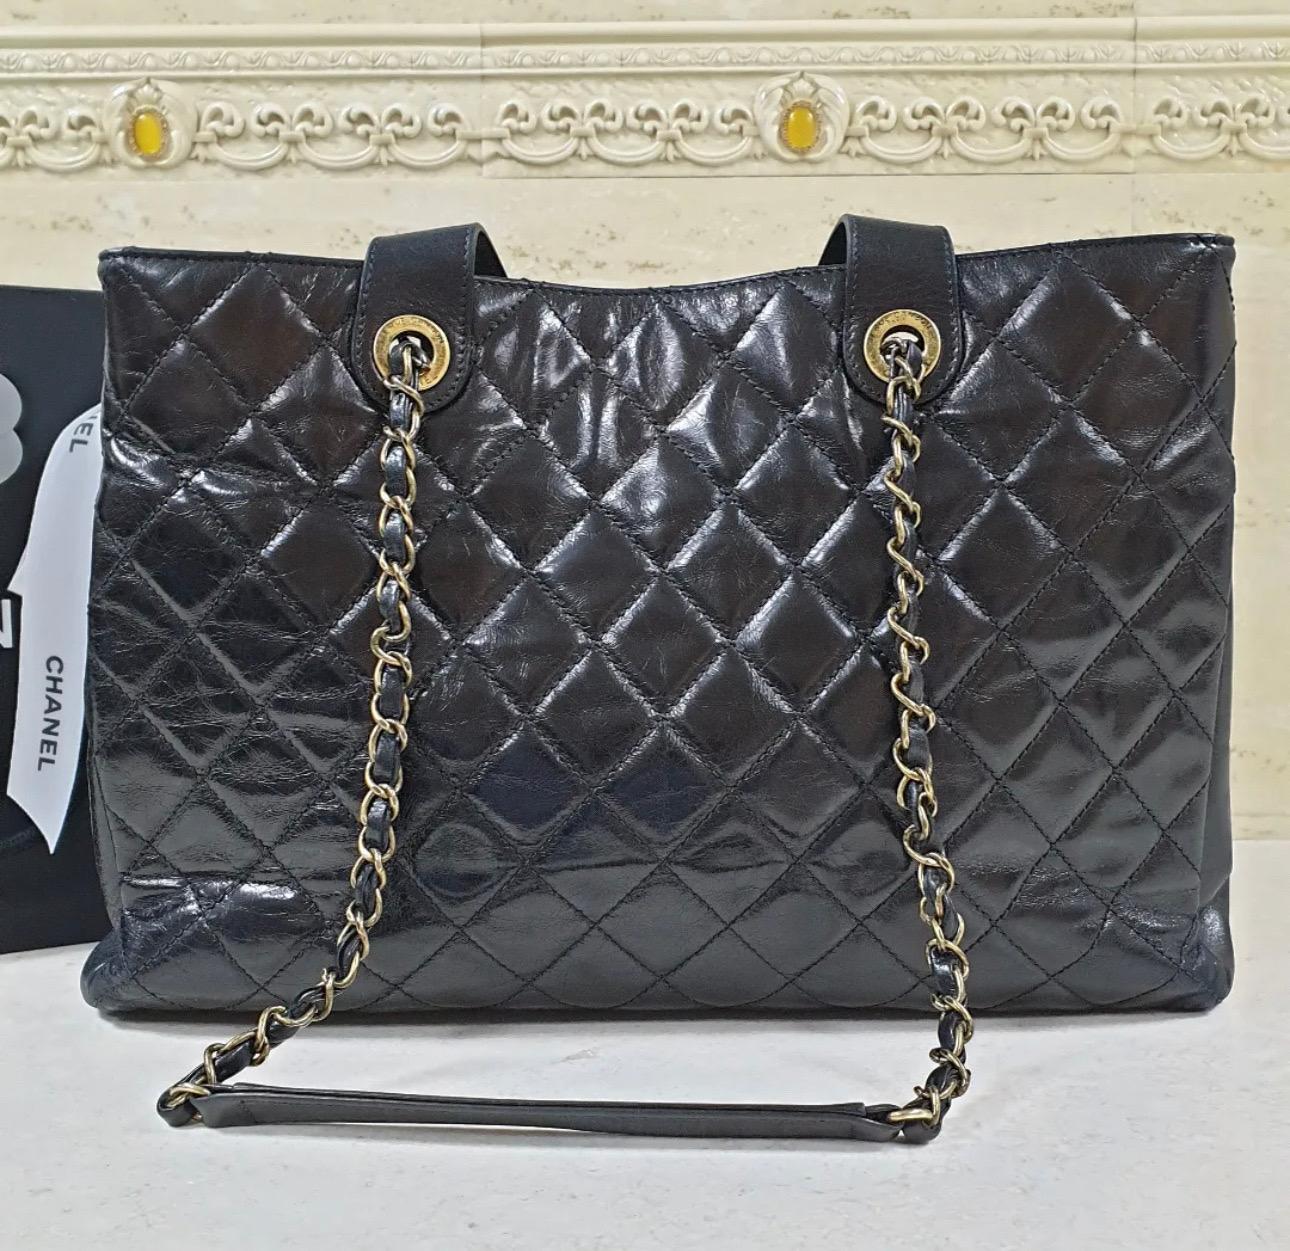 Chanel Black Python Quilted Lambskin Tote Bag 2